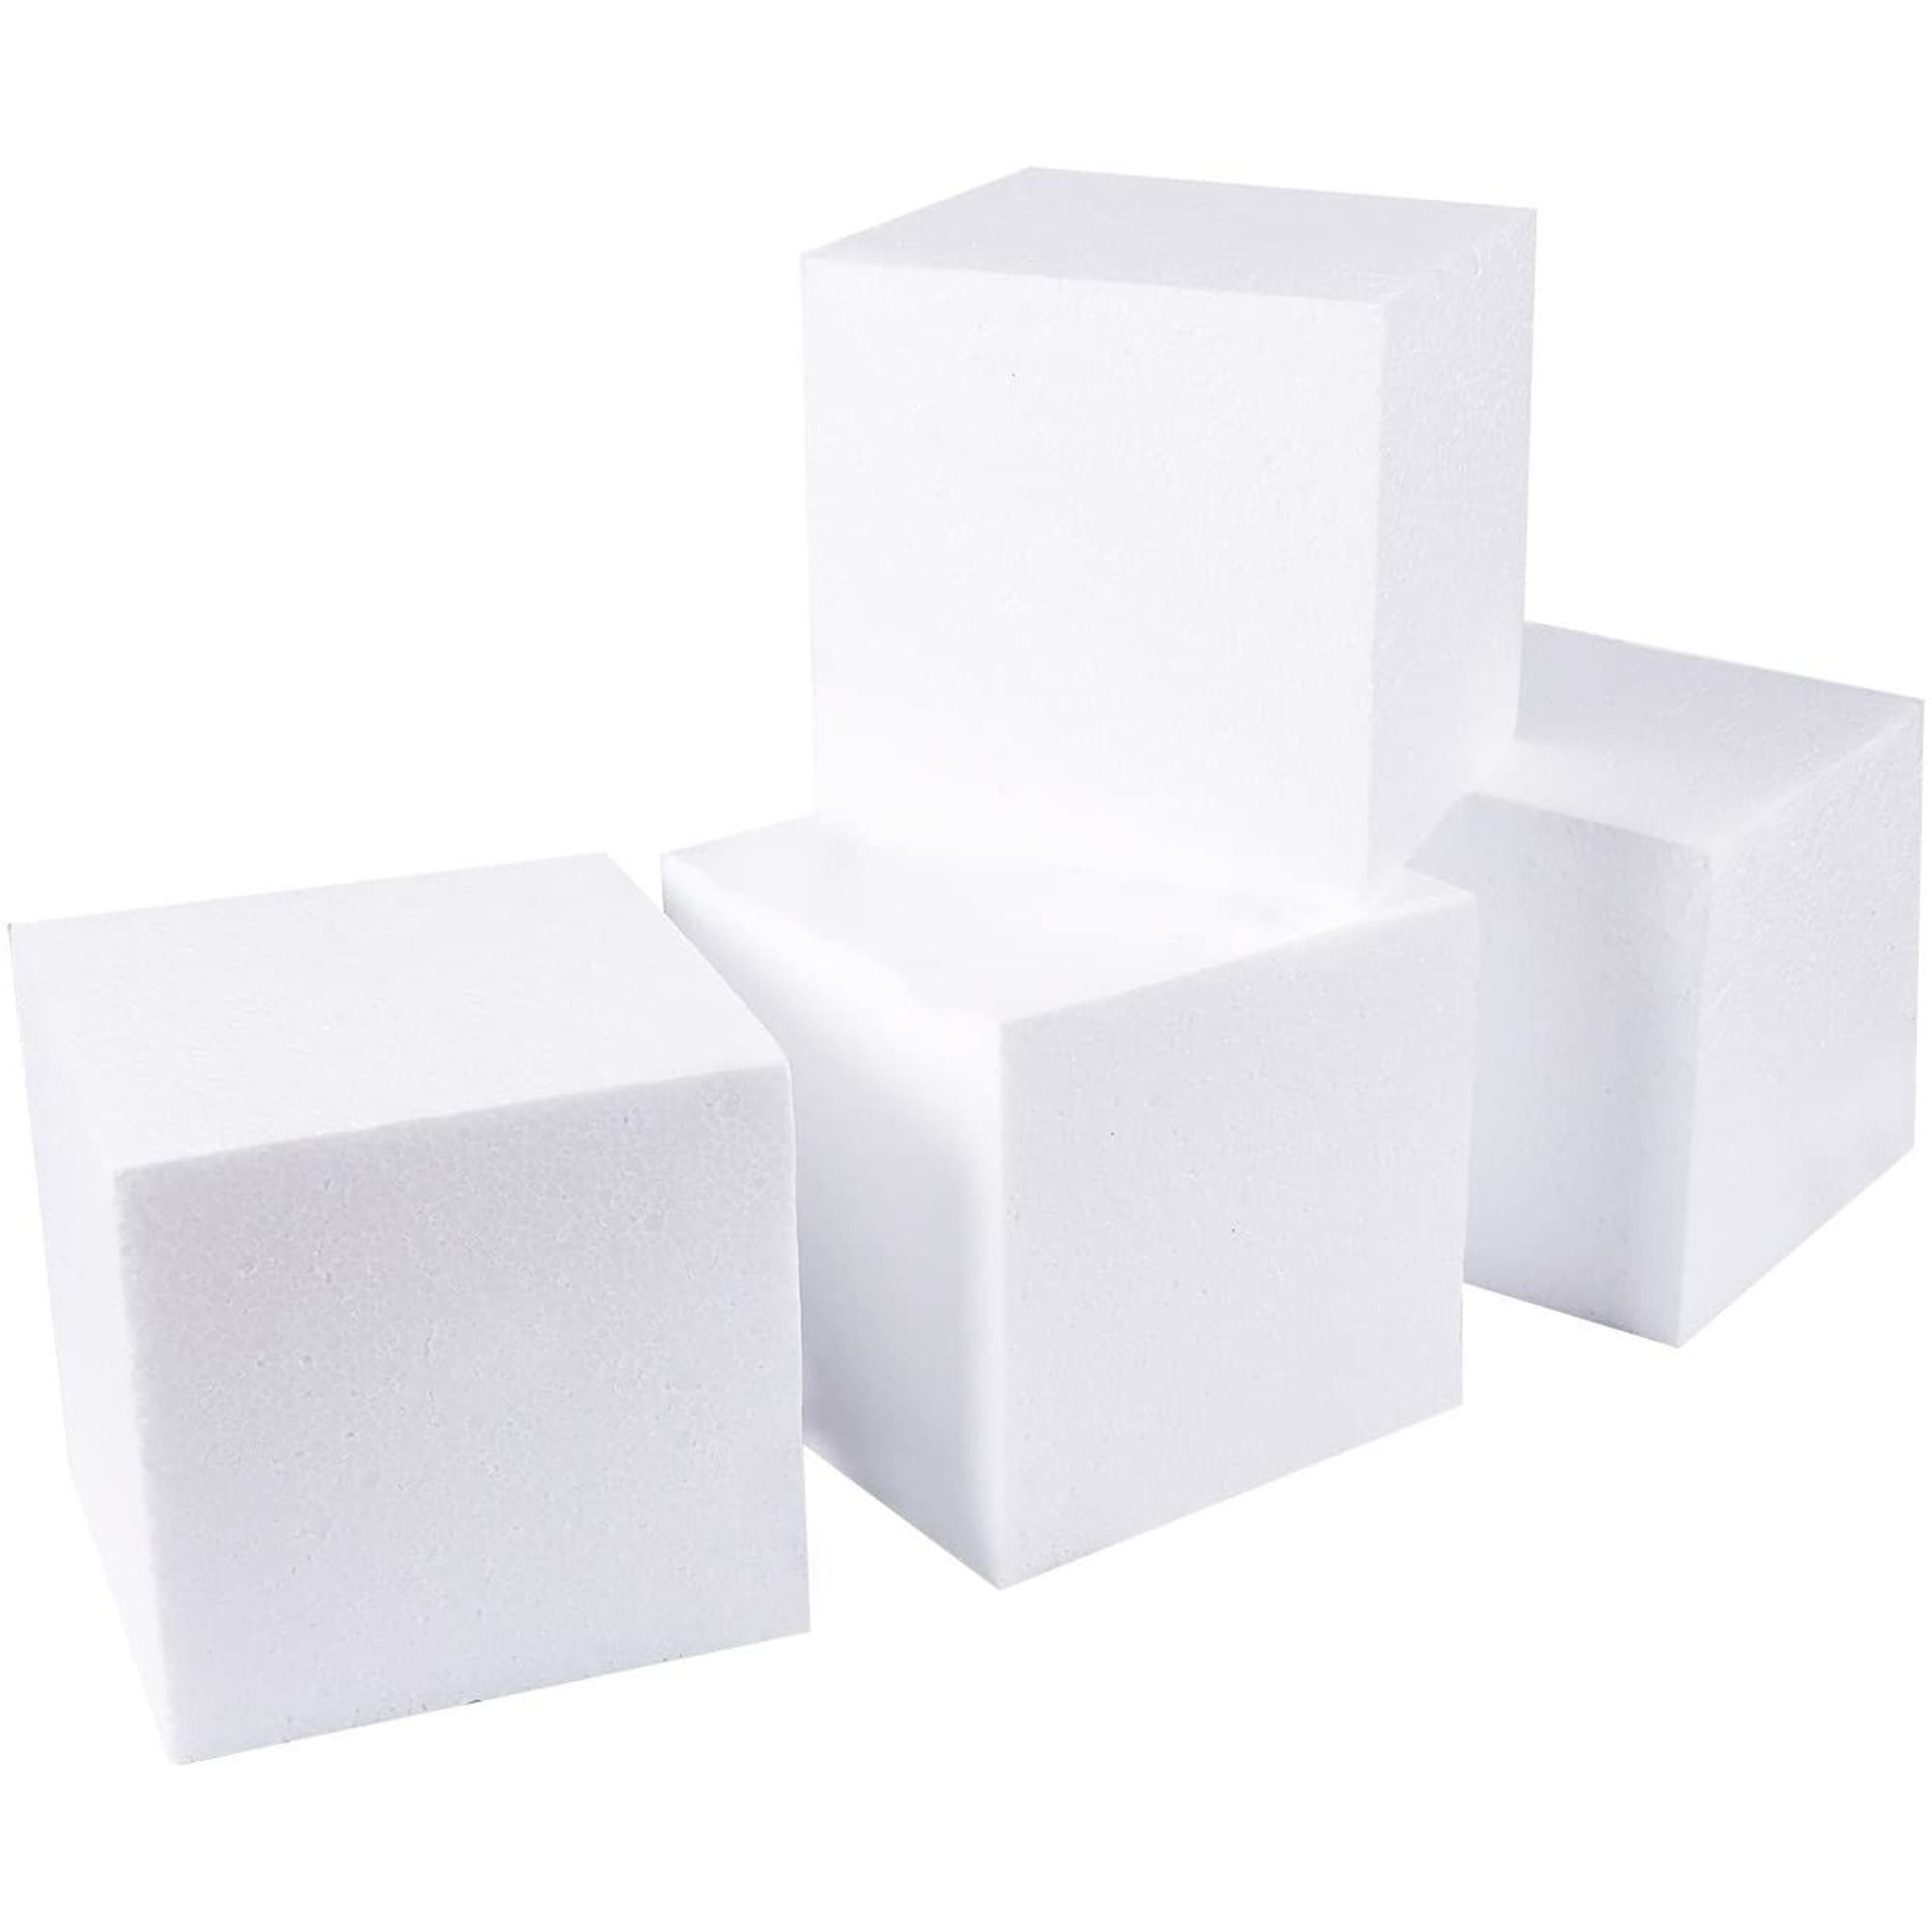 4 Pack Foam Cube Squares for Crafts - Polystyrene Blocks for DIY Projects,  Models, Arts Supplies (6x6x6, White) 